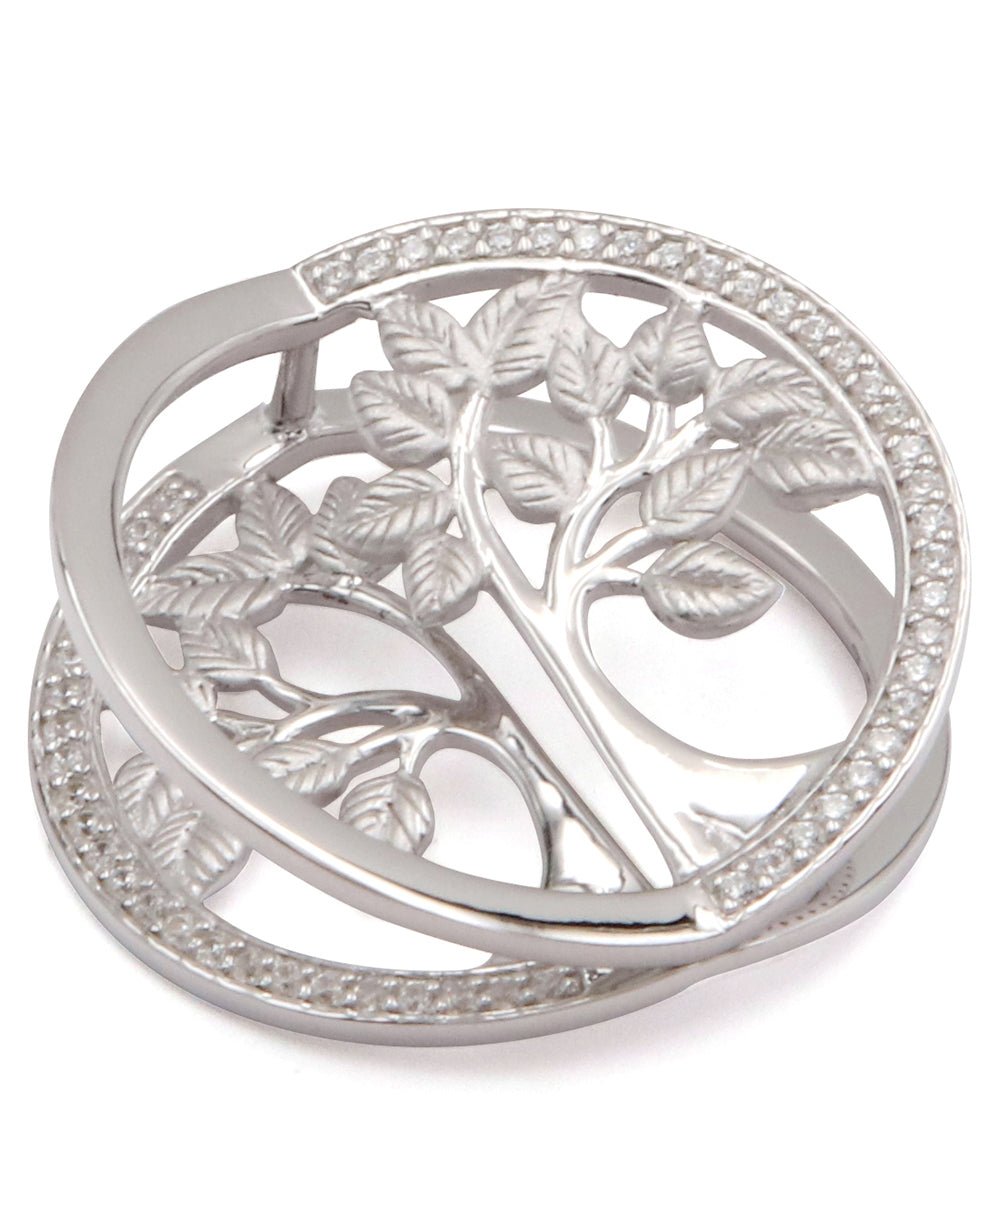 Artistic Series Tree of Life Sterling Pendant - Charms & Pendants